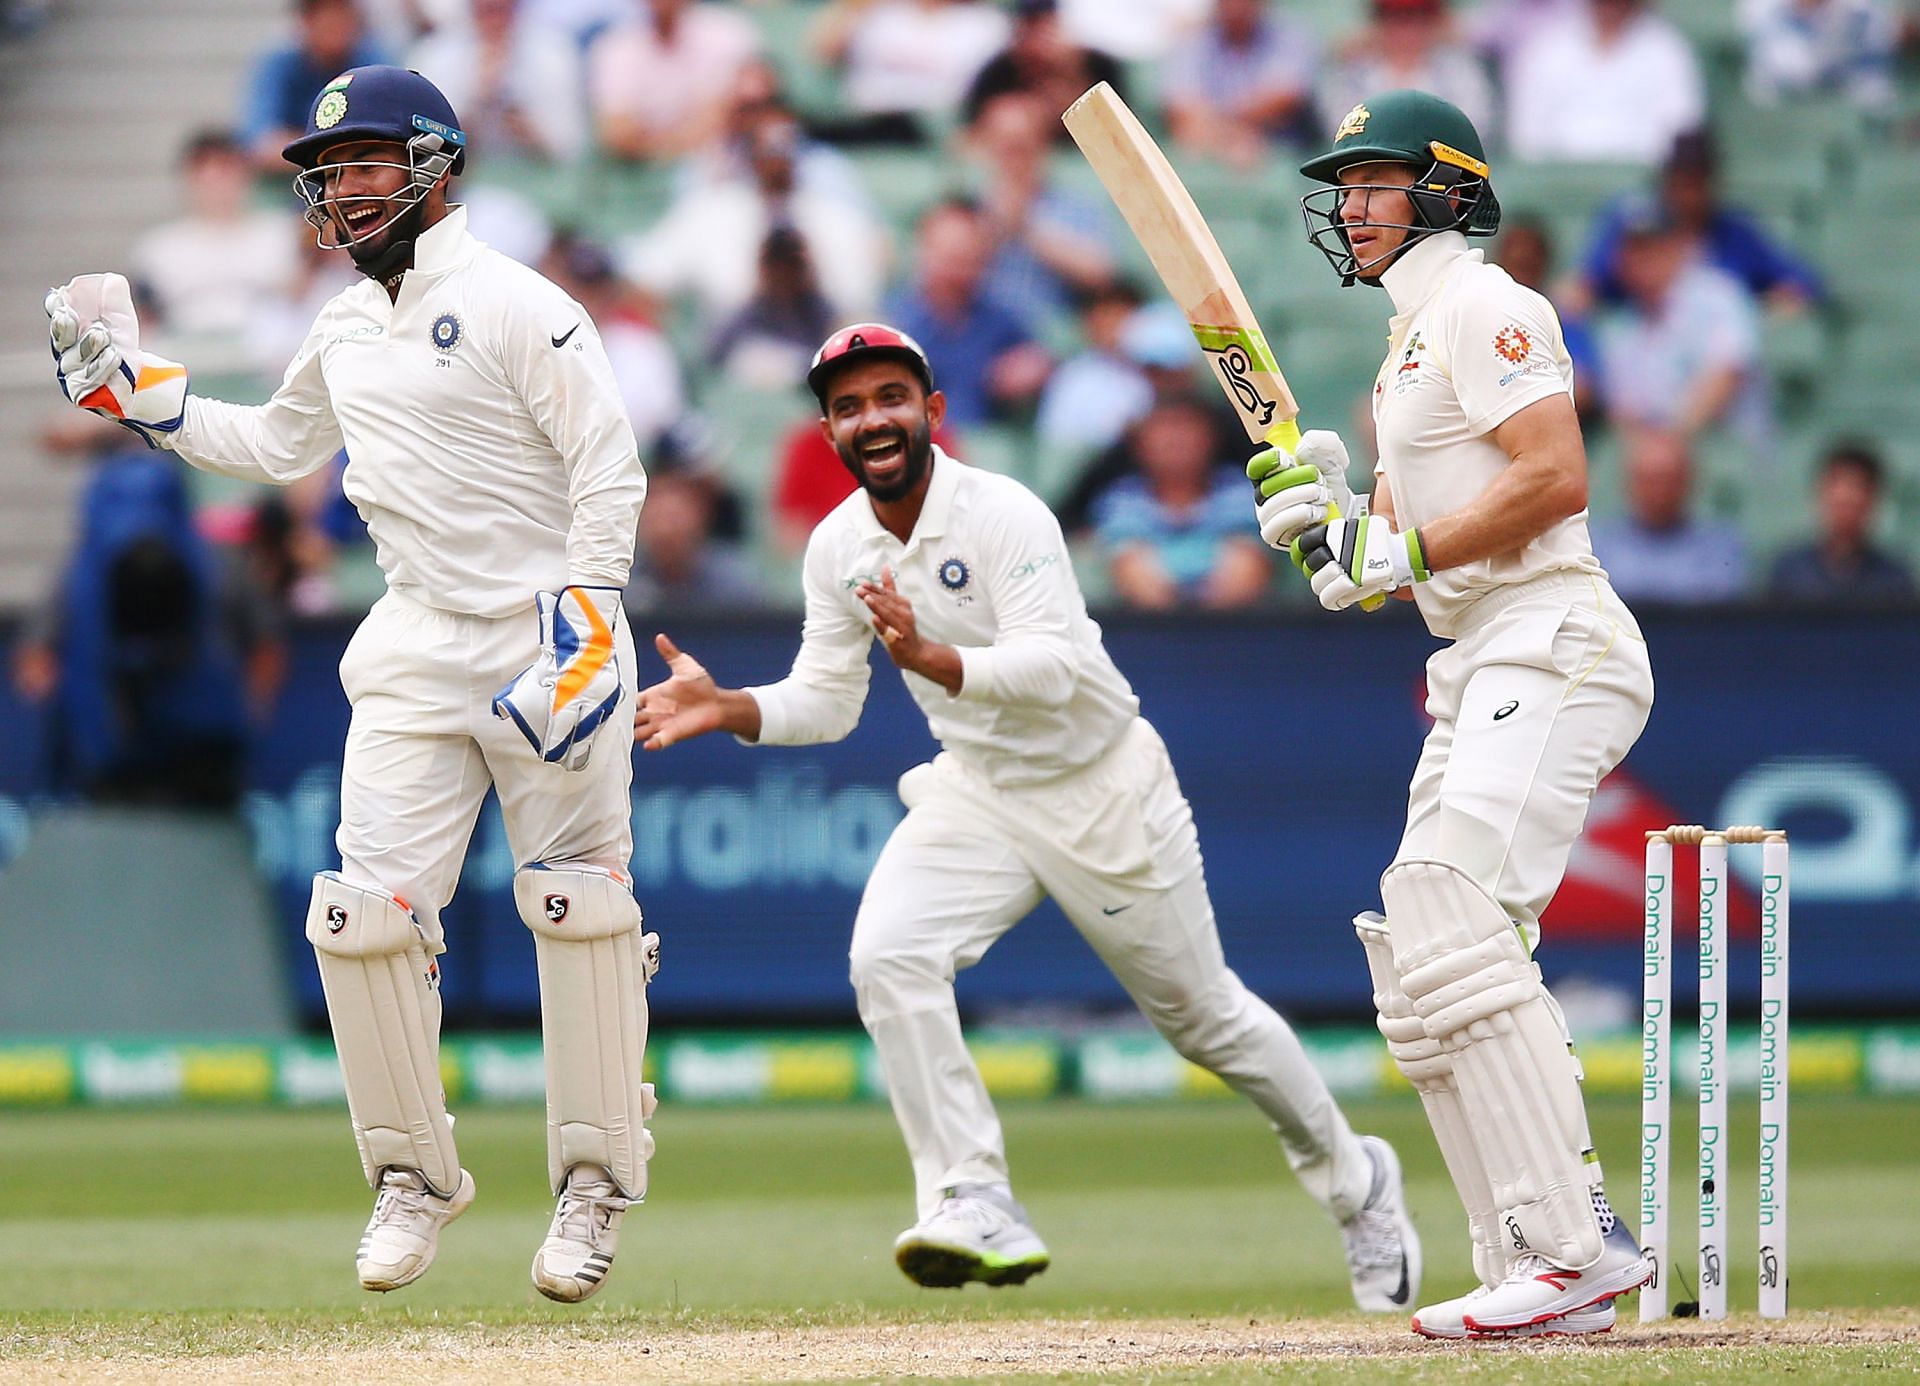 Tim Paine reacts after his dismissal as Rishabh Pant (left) celebrates during Day 4 of 2018-19 Boxing Day Test. Pic: Getty Images